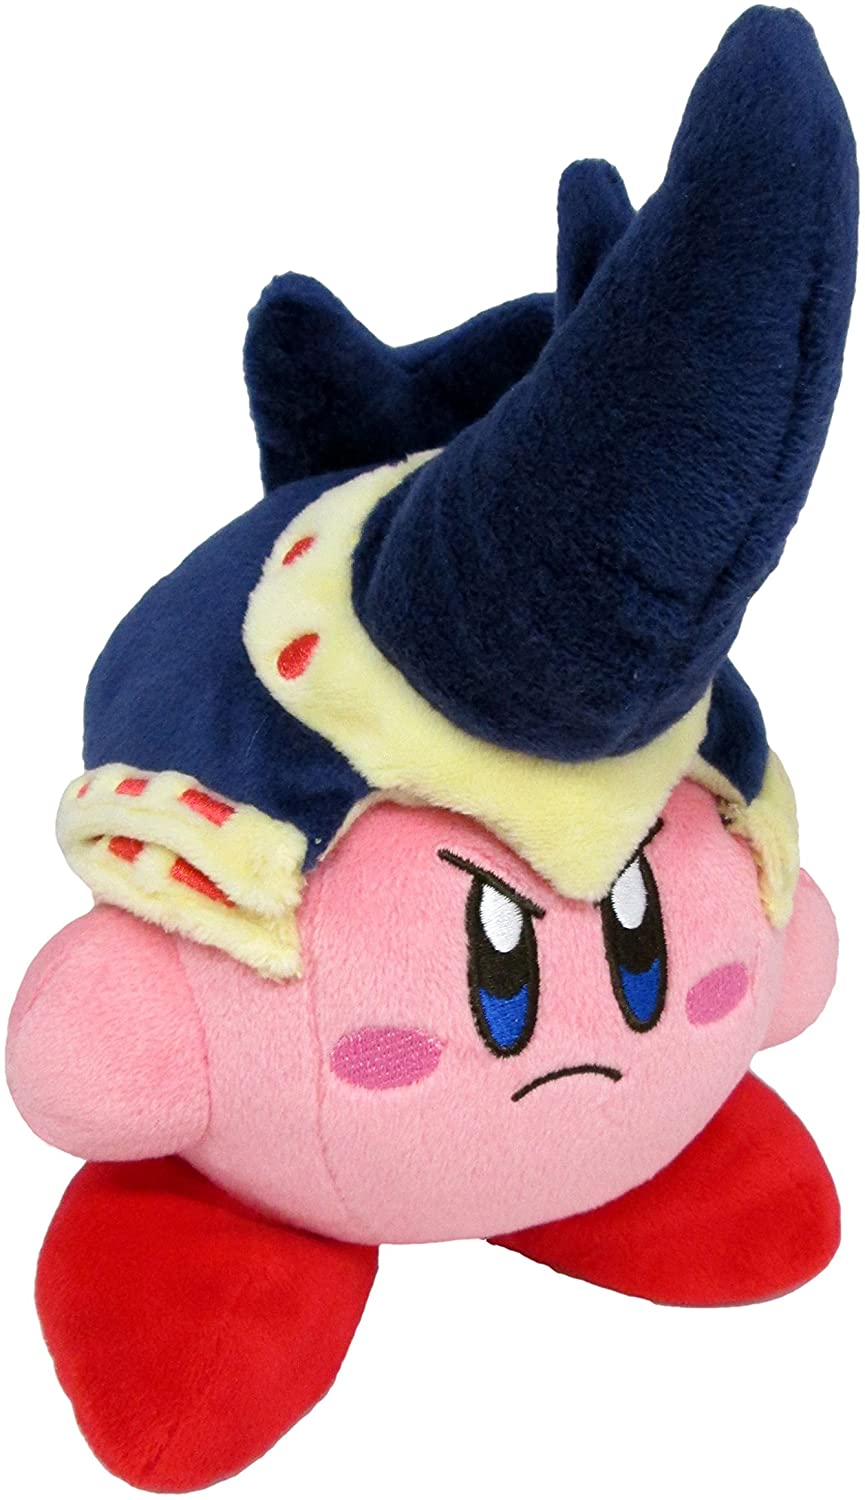 Sanei All Star Collection 6 Inch Plush - Beetle Kirby KP13